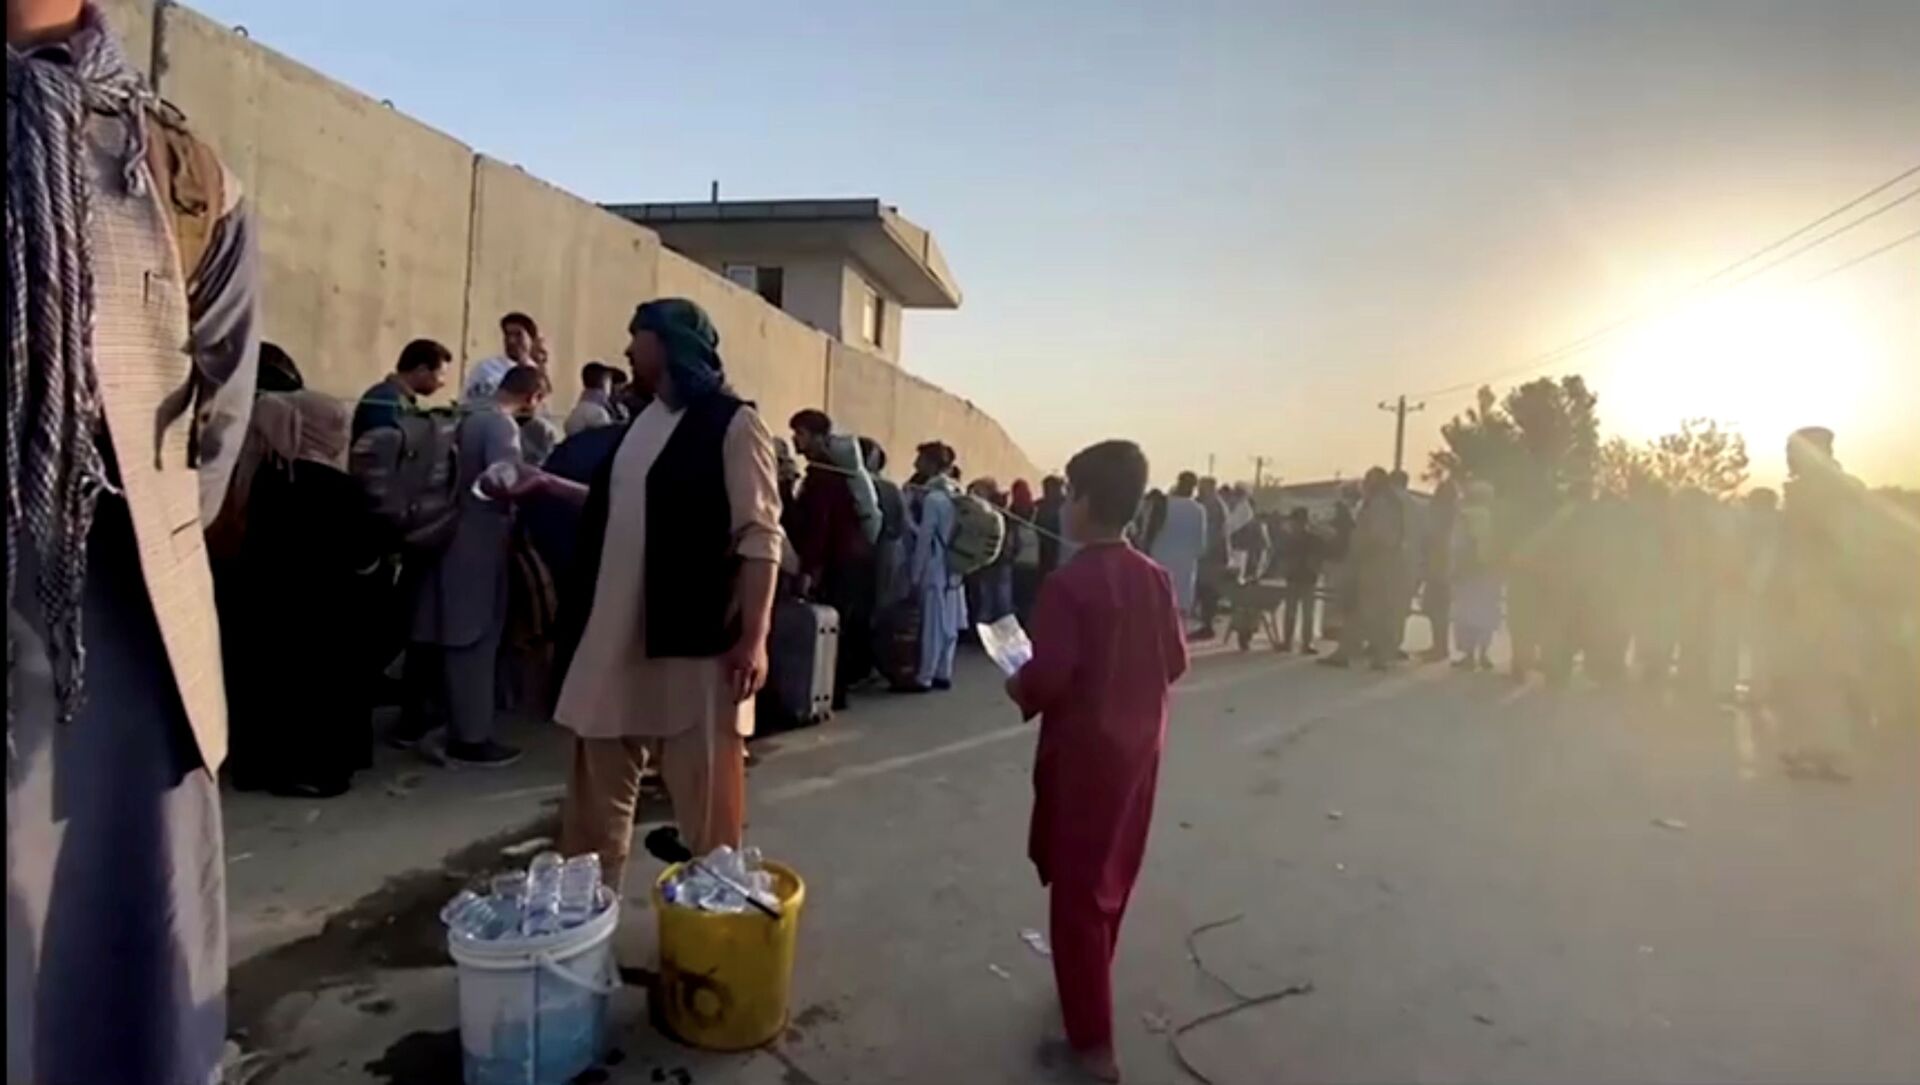 A man instructs people to queue as they stand with their belongings outside Kabul airport, Afghanistan, August 22, 2021 in this still image taken from video - Sputnik International, 1920, 23.08.2021